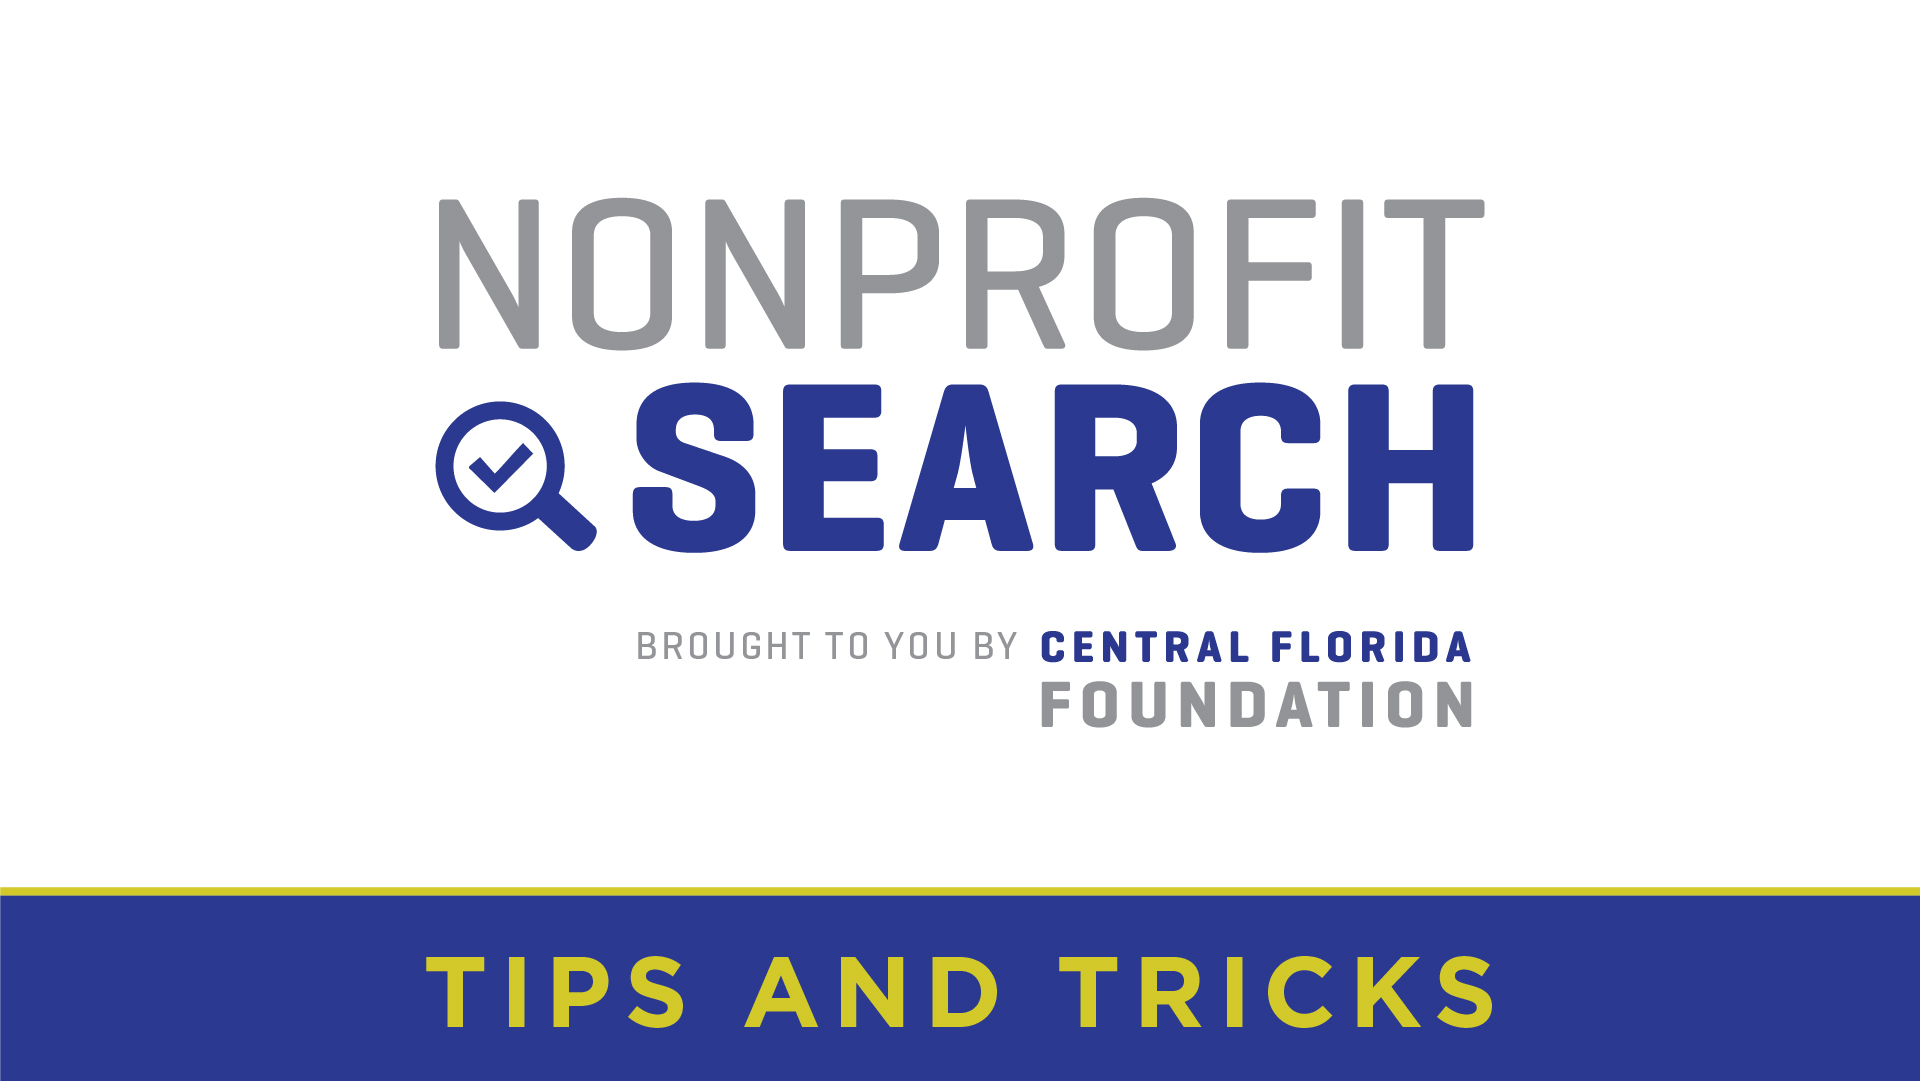 NONPROFIT SEARCH TIPS & TRICKS VIDEO SERIES